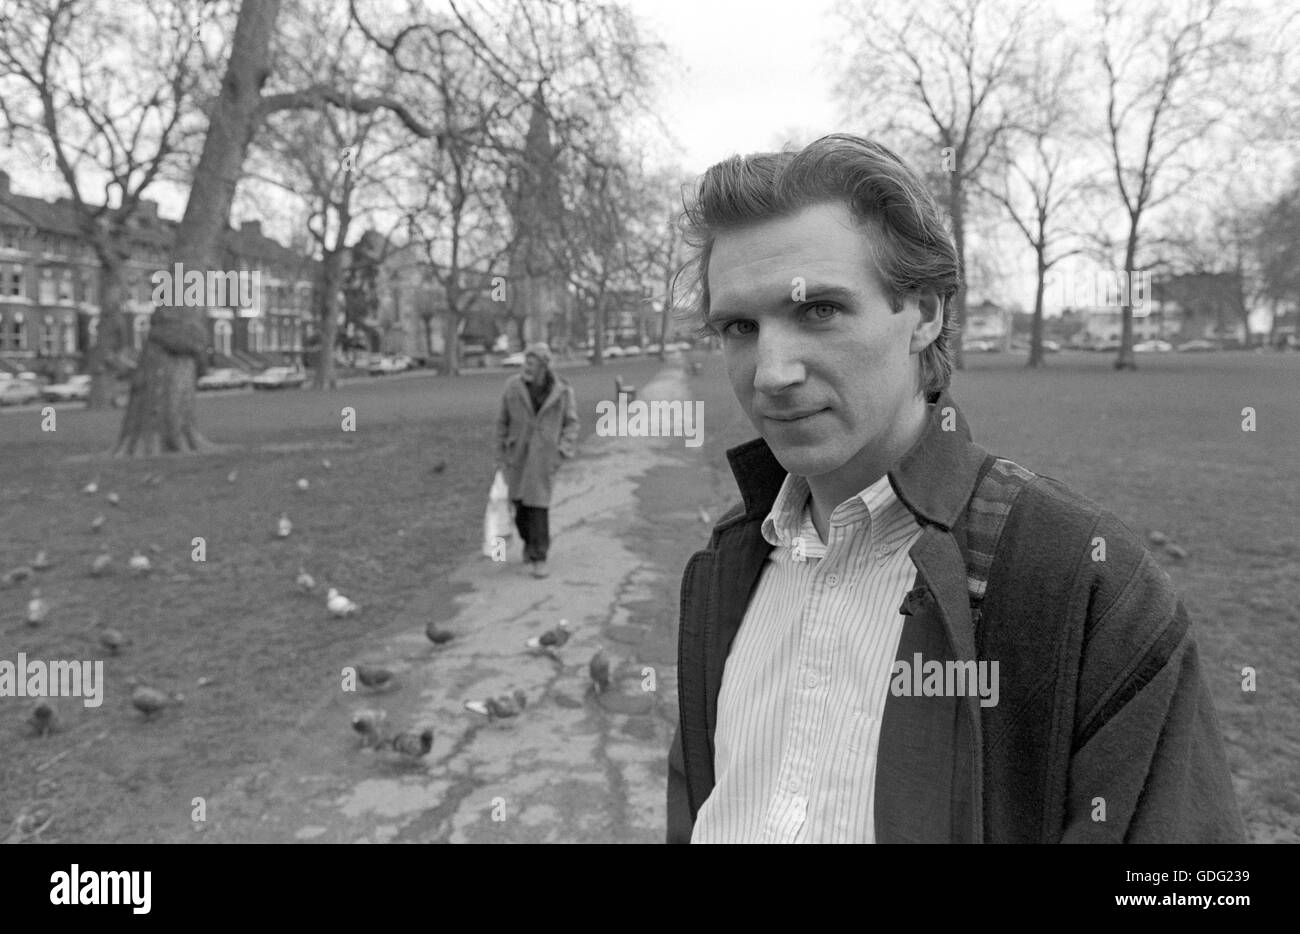 Actor Ralph Fiennes who at the time had played Nazi SS officer and war criminal Amon Göth in the film Schindler's List. Stock Photo